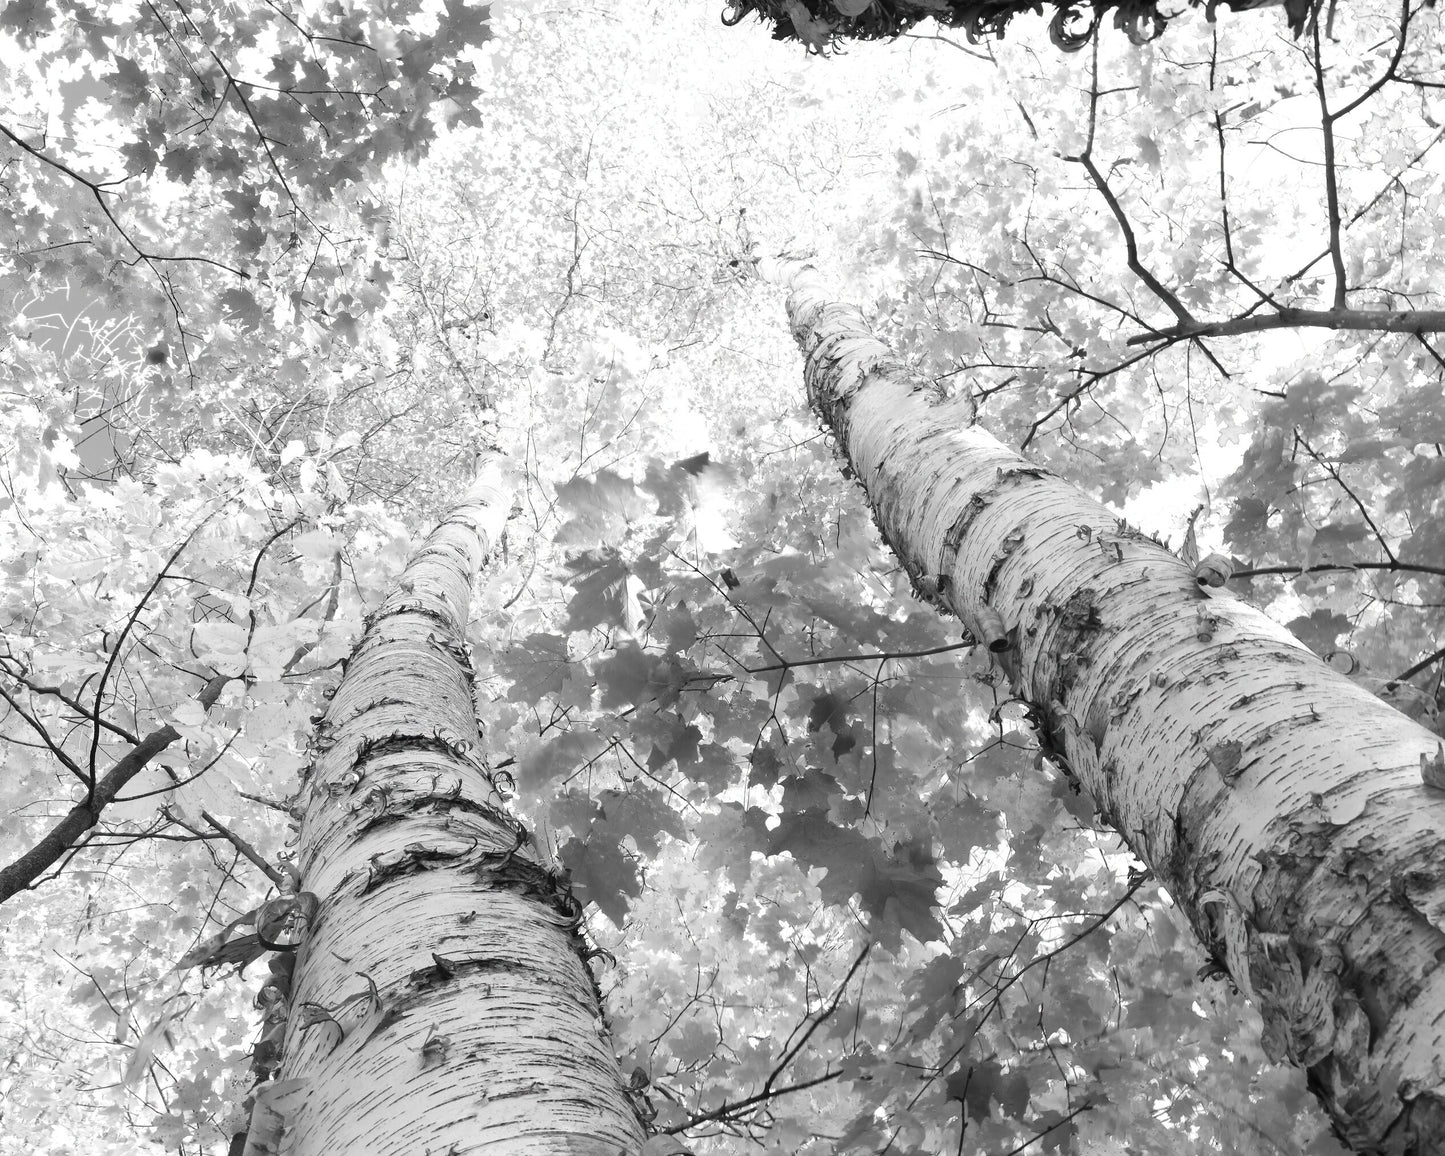 Winding Birch Trees photo print, black and white trees photography art, large picture wall decor, paper canvas 8x10 12x12 20x30 24x36 40x60